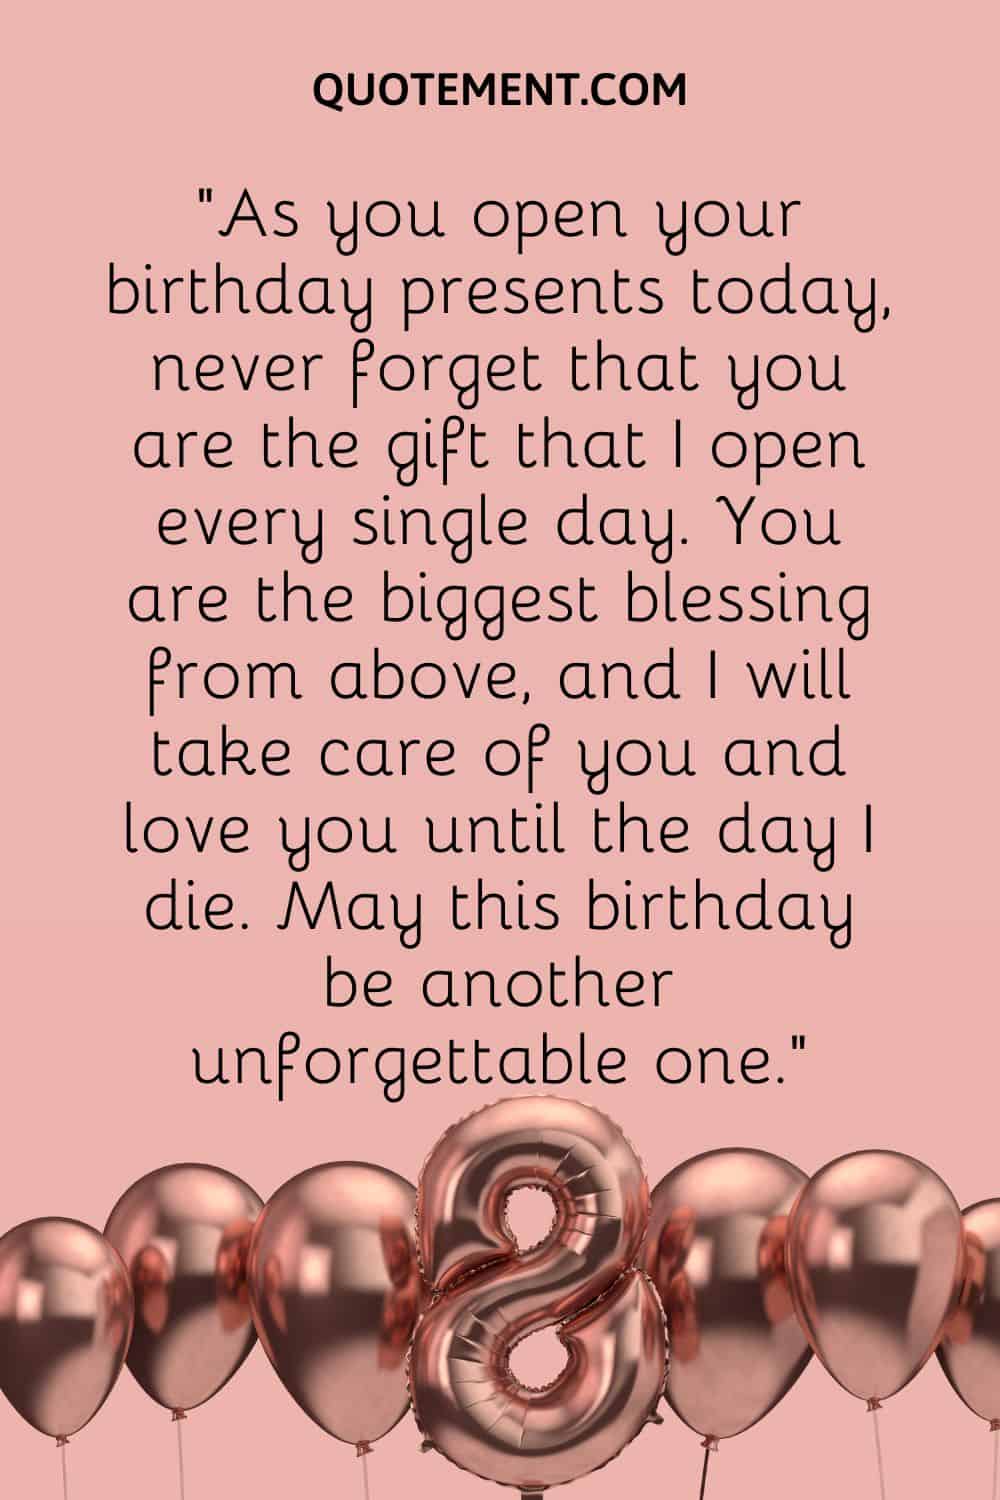 As you open your birthday presents today, never forget that you are the gift that I open every single day